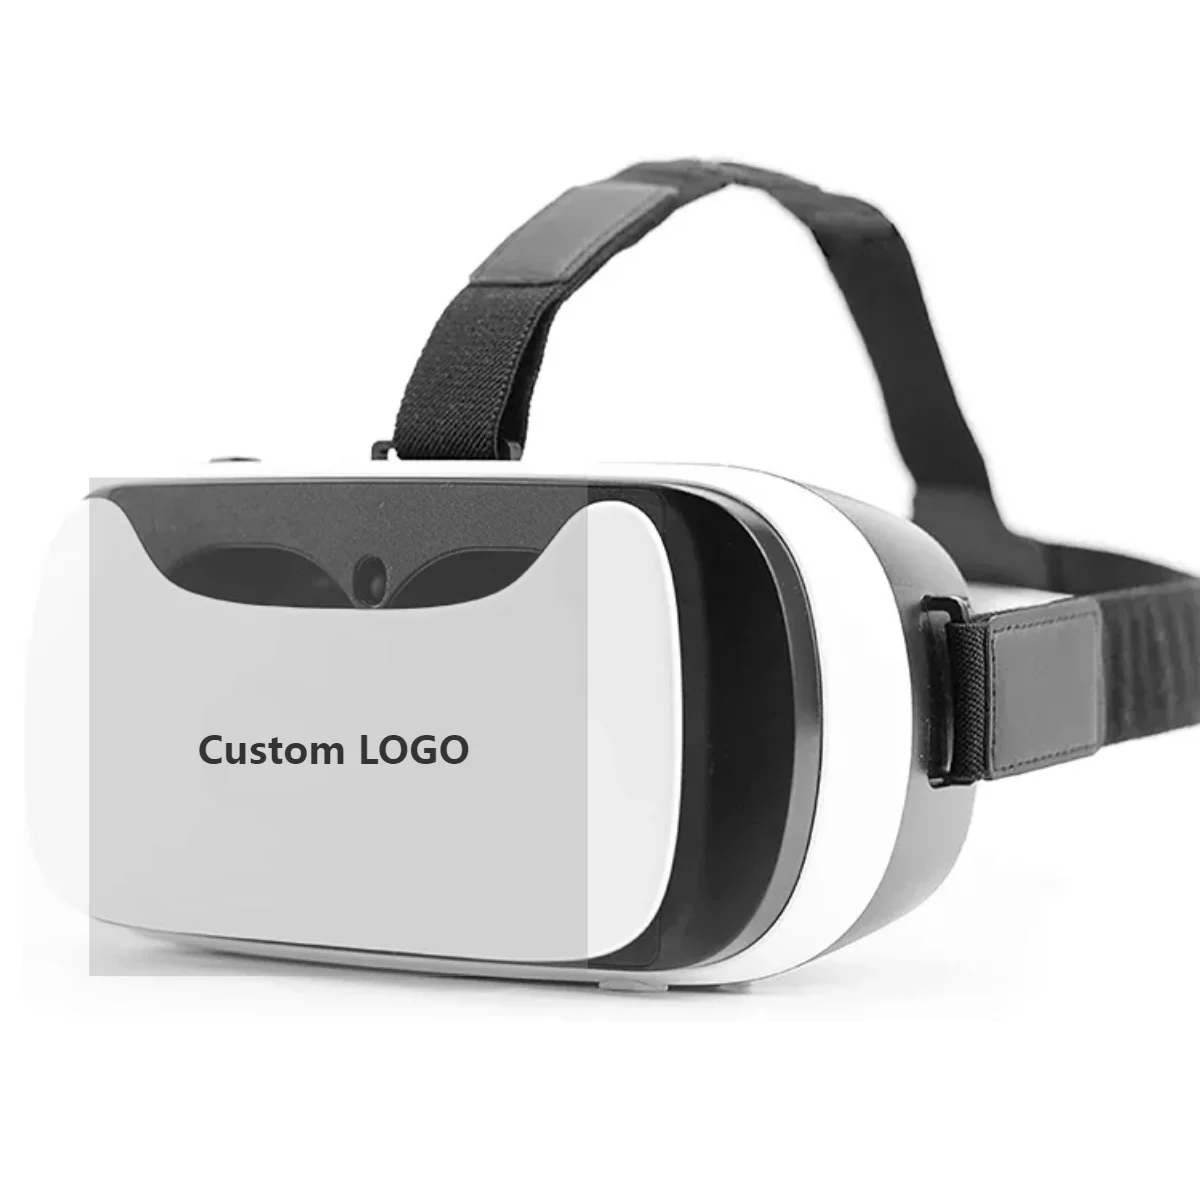 Cheap Funny Video Film Games Plastic Virtual Reality 3d Vr Glasses - Buy Vr  Video Film Games,Cheap 3d Glasses,3d Vr Glasses Product on 